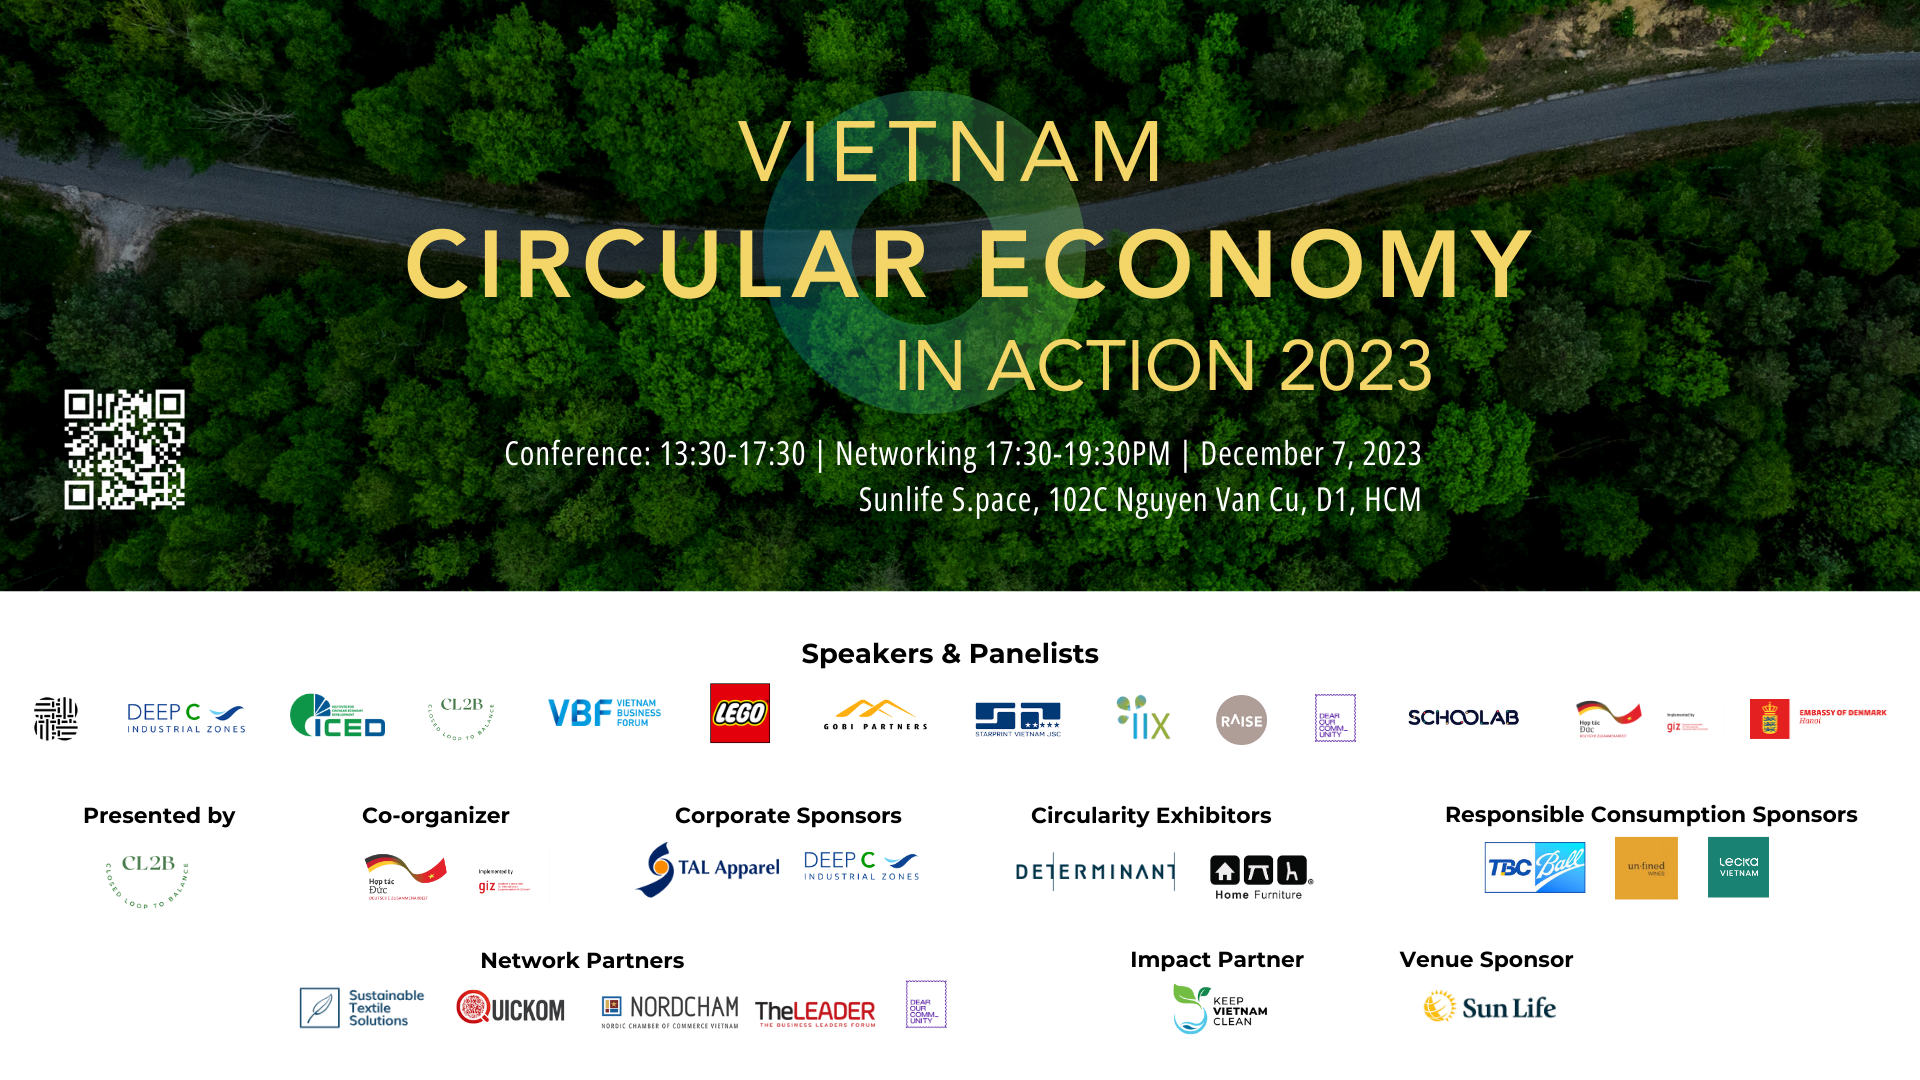 KVC Is Ready To Join Vietnam Circular Economy in Action 2023!